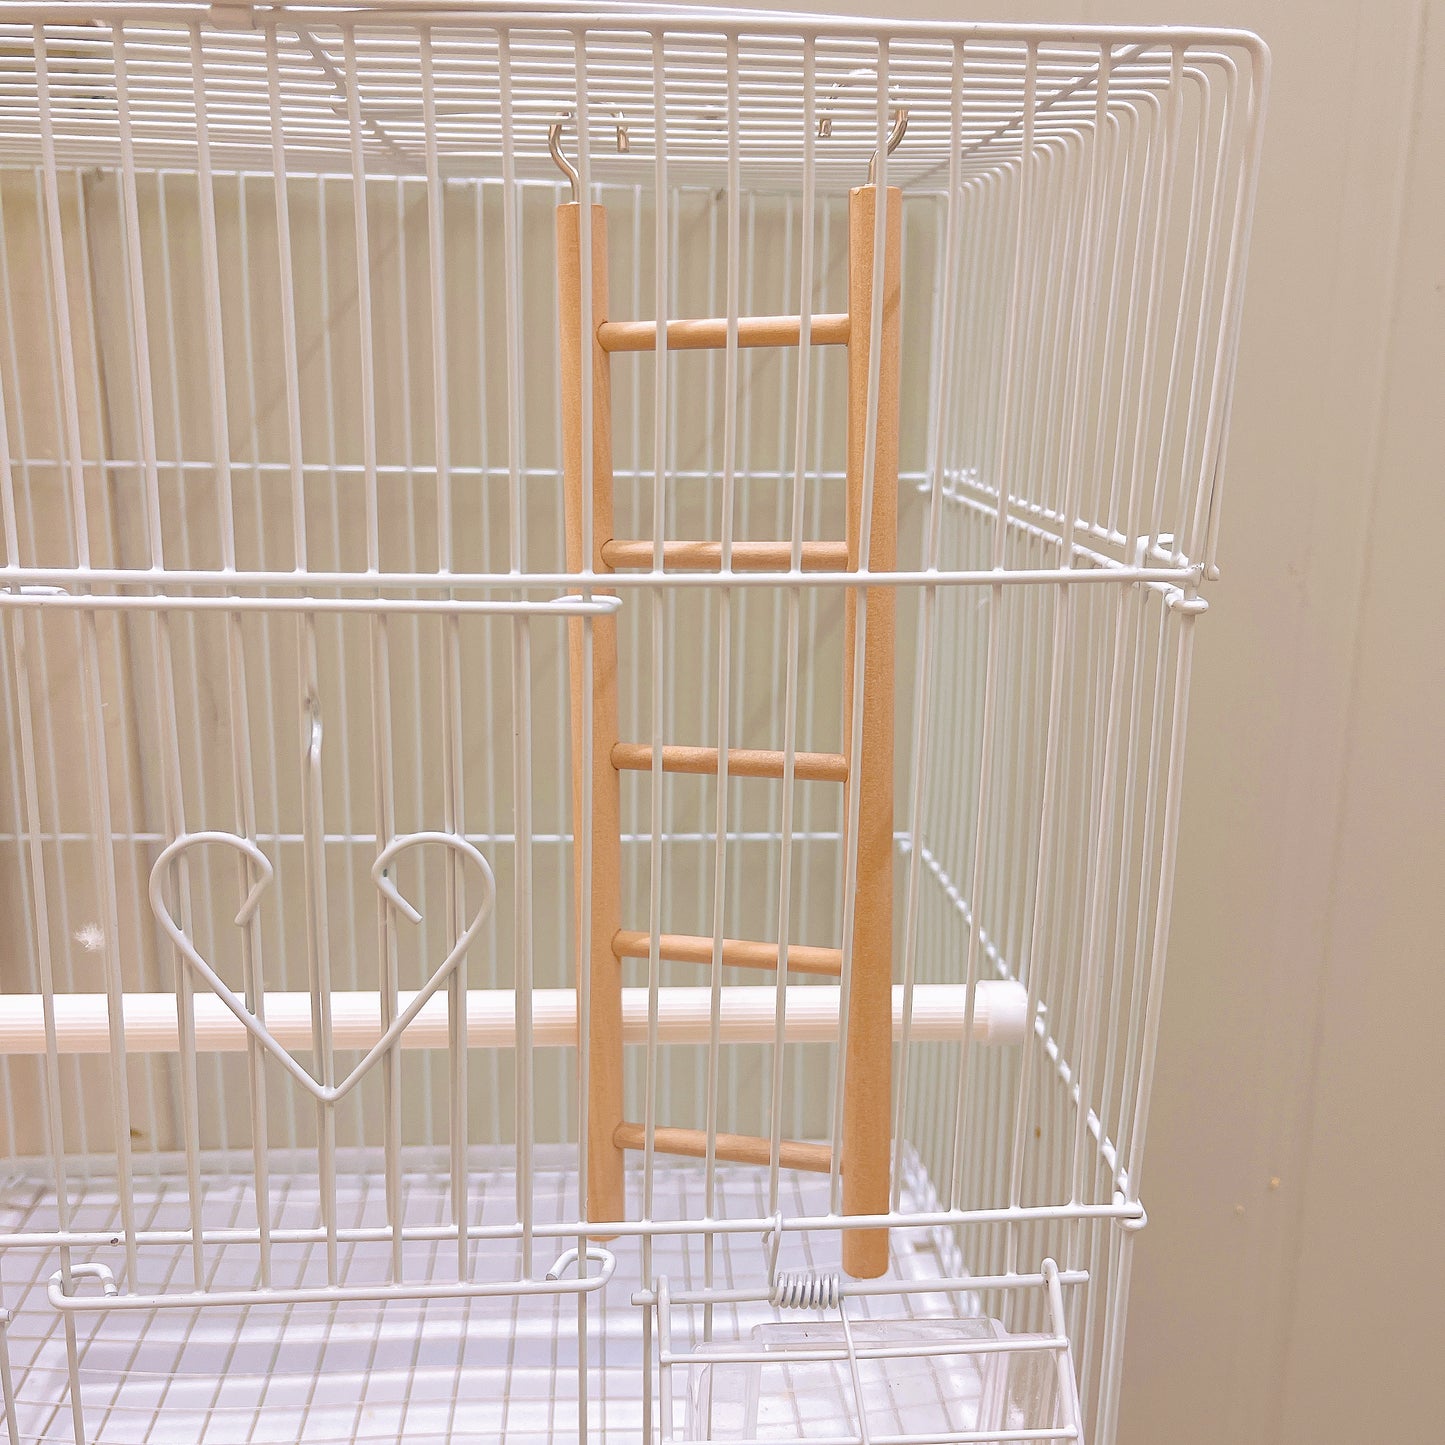 Wooden Perch Ladder Toy for Parrots - Climbing and Entertainment for Birds - 2 Hooks for Easy Cage Attachment Parakeet/Budgie, Cockatiel, Finch, Lovebird, Monk Parakeet, Dove, Parrotlet, Sparrow